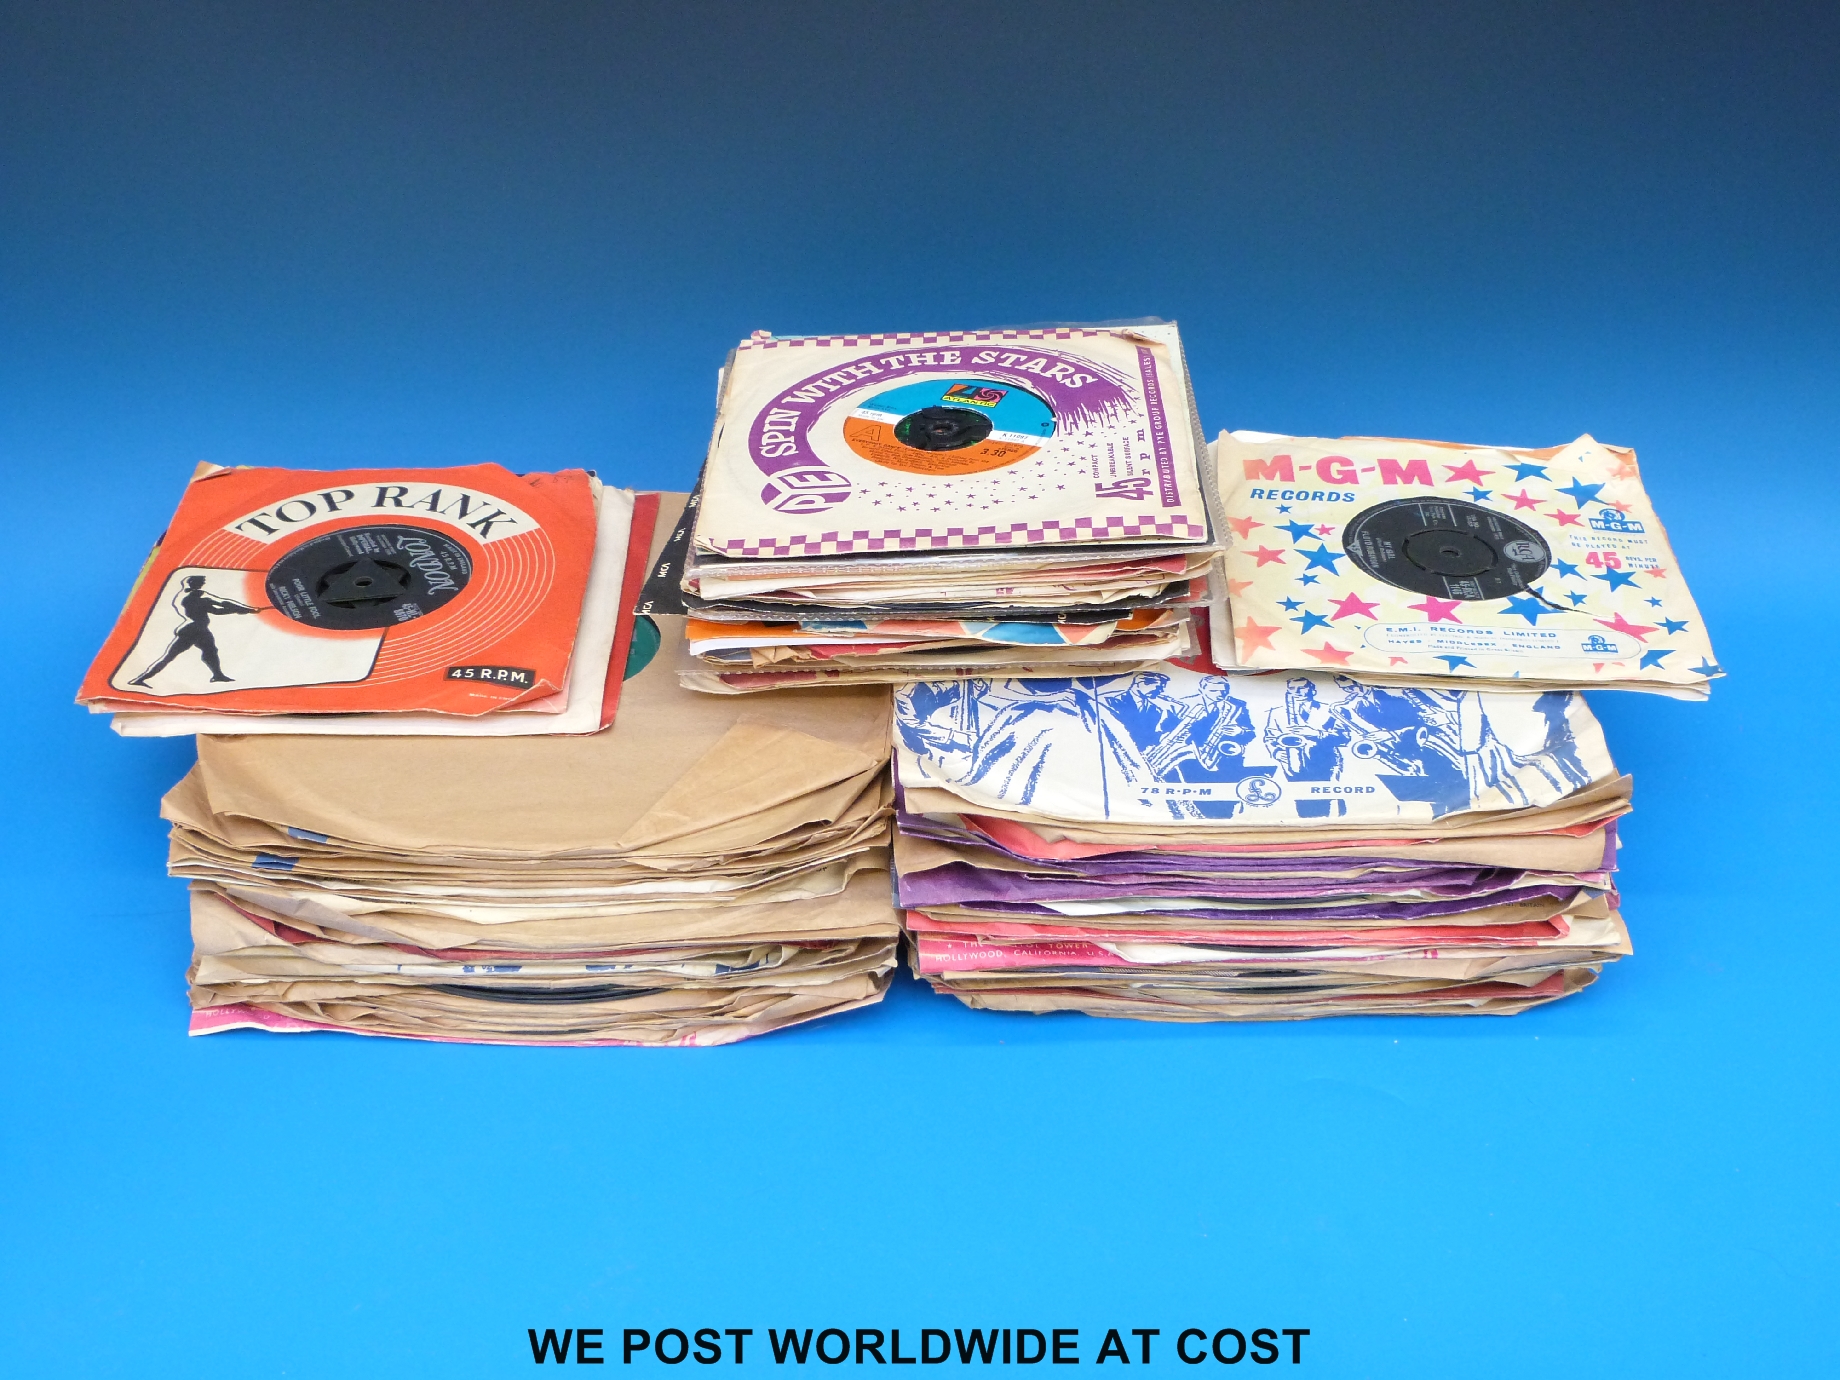 Approximately 40x 7” singles, to include Elvis Presley, Ricky Nelson, The Teddy Bears, - Image 2 of 2